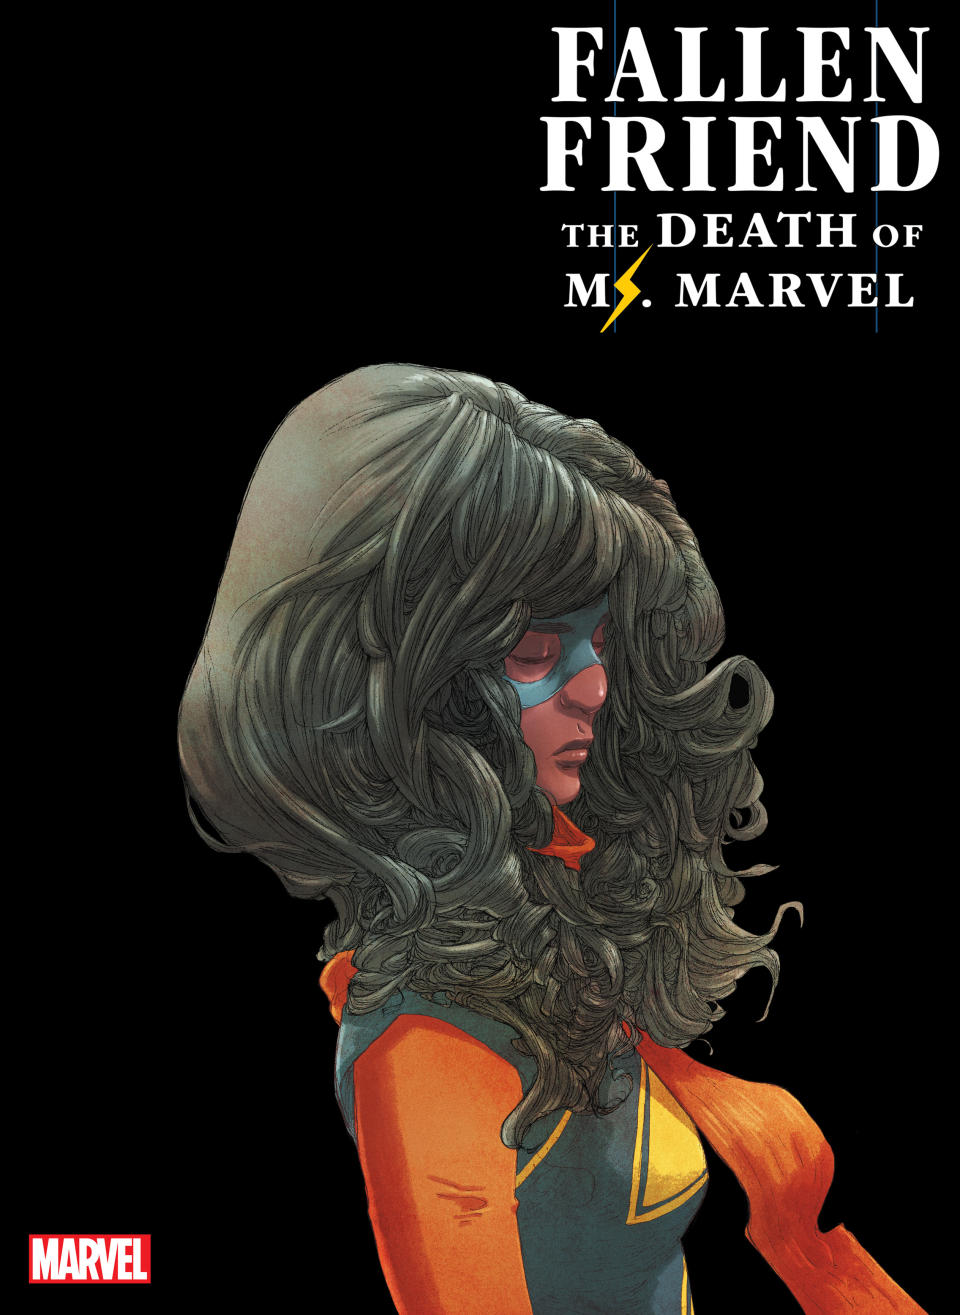 The covers for Fallen Friend: The Death of Ms. Marvel #1.